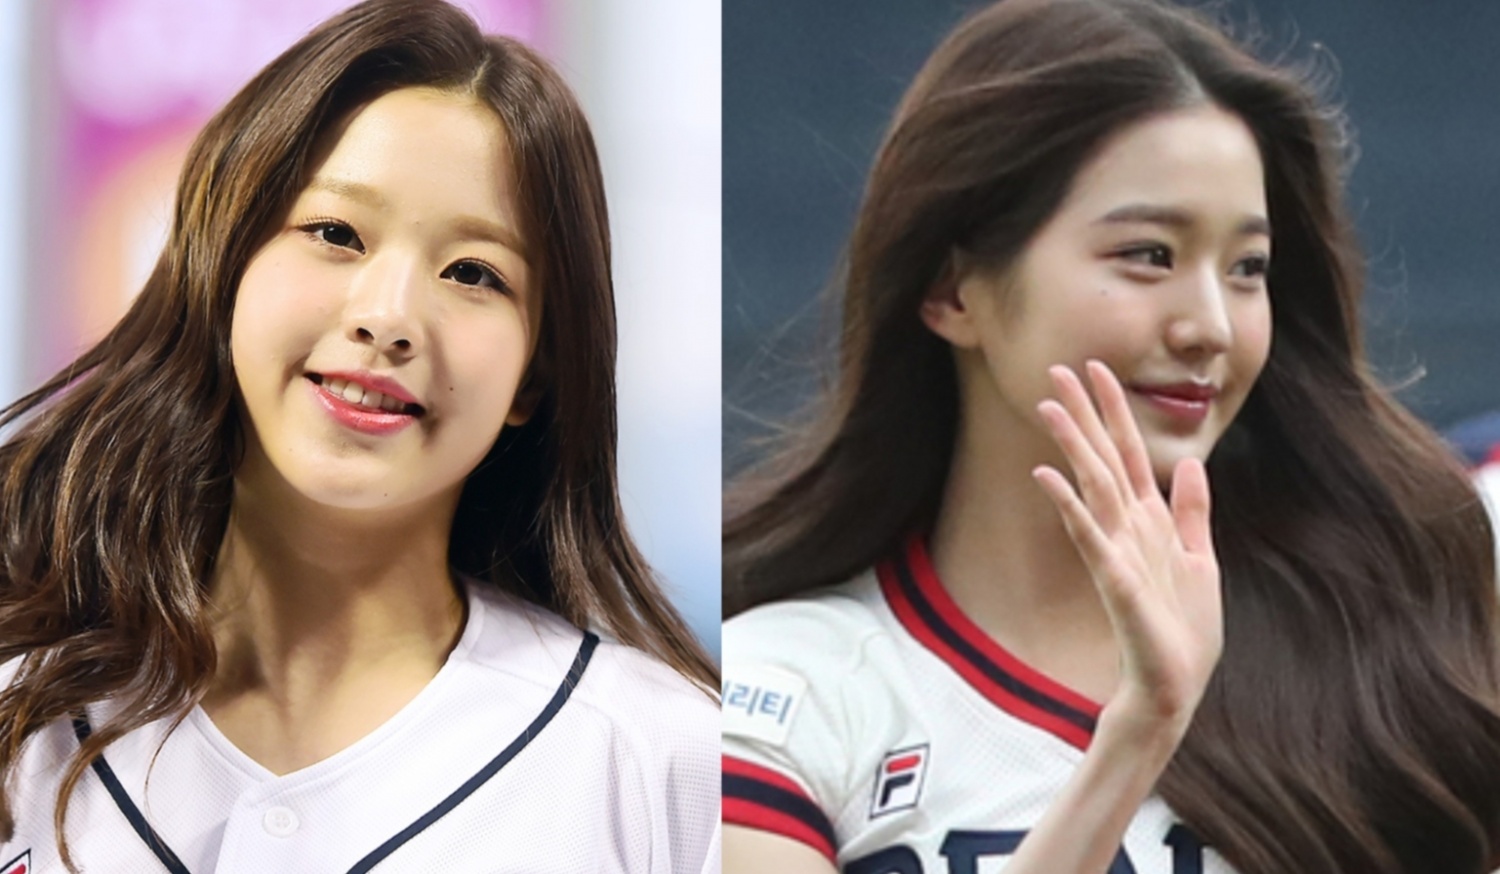 jang-wonyoung-in-iz-one-vs-ive-heres-how-her-visuals-changed-after-four-years.jpg